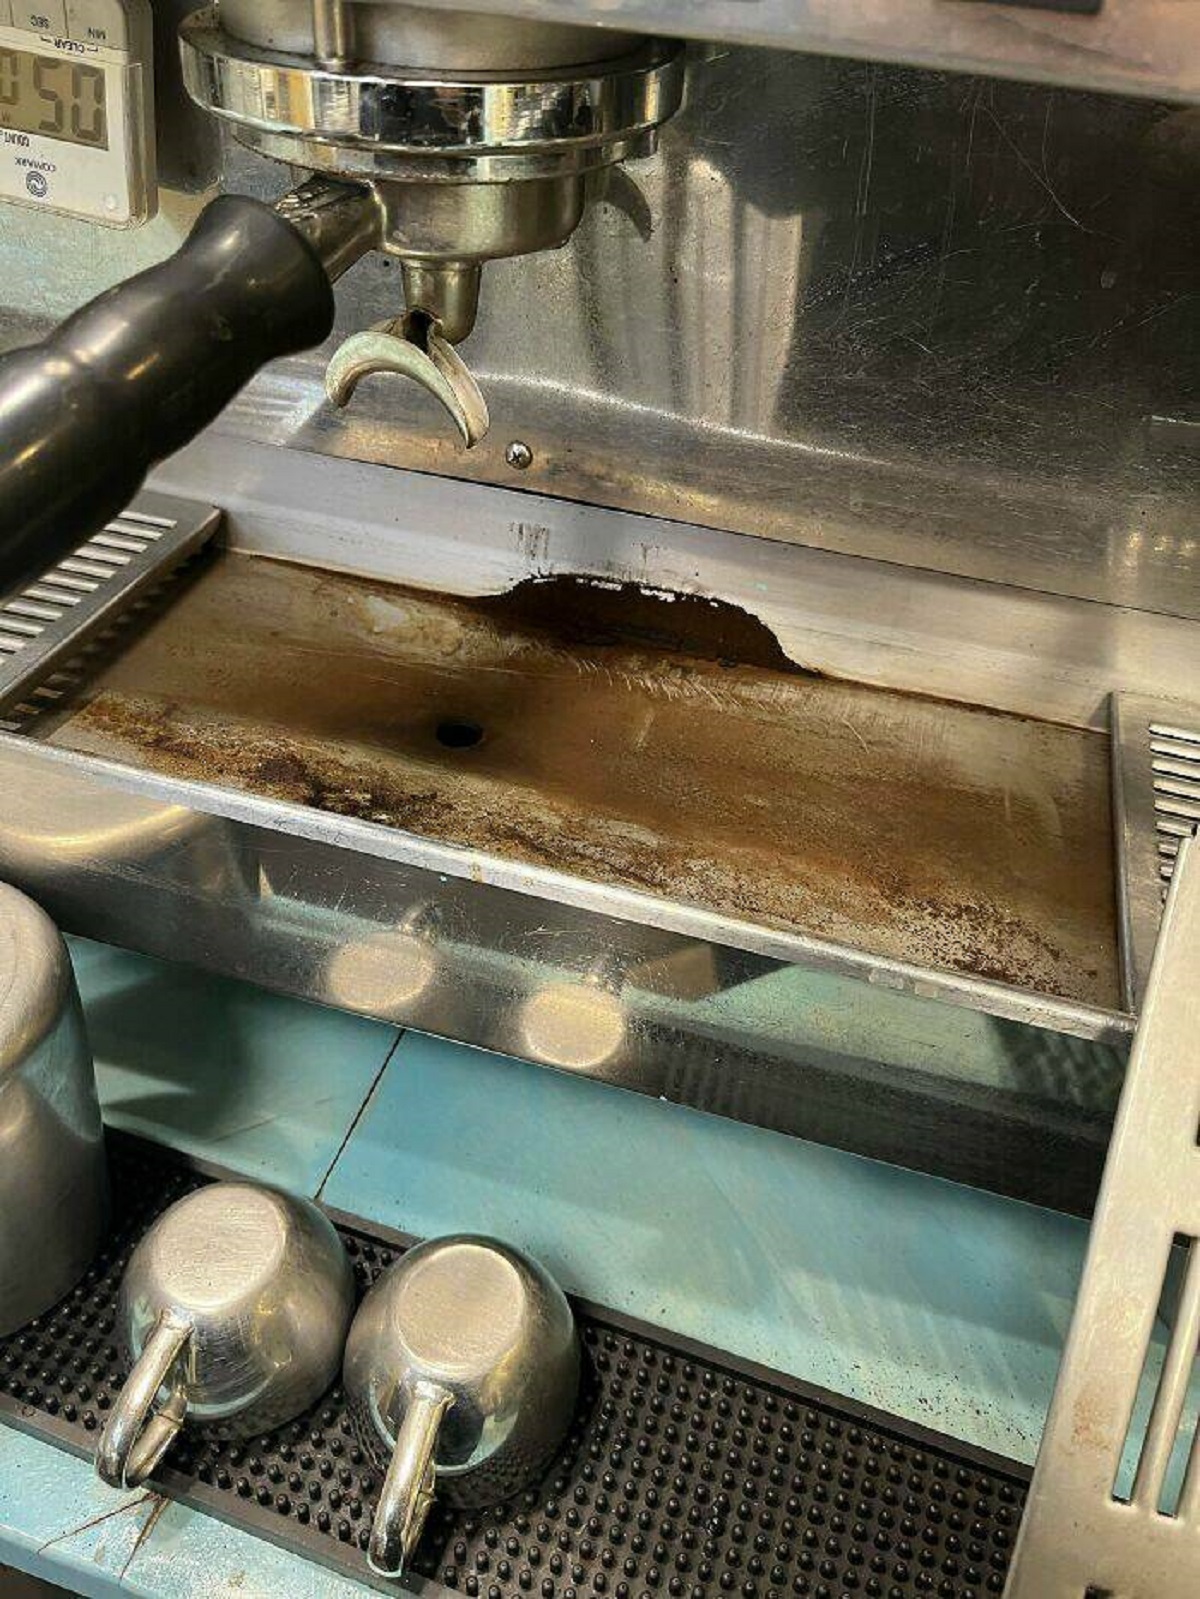 "This Is Supposed To Be Cleaned Every Night By My Coworker With 15 Years Of Experience Running His Own Coffee Shop"